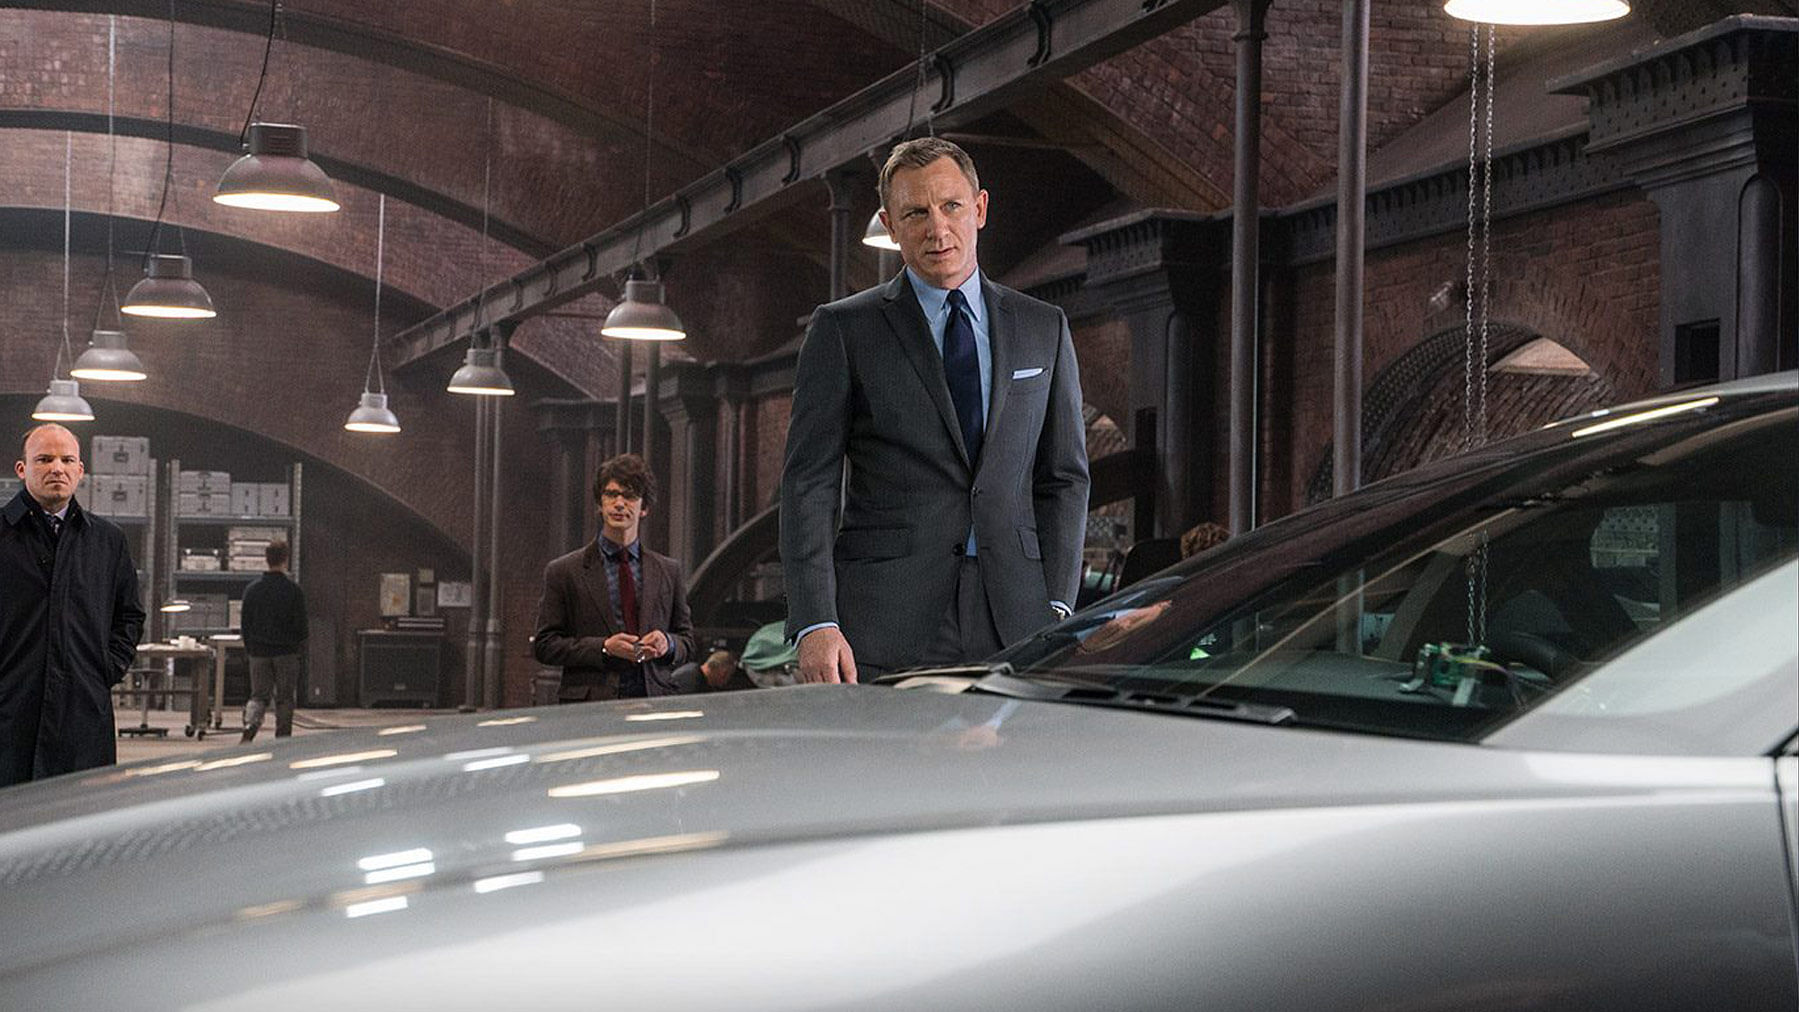 James Bond (Daniel Craig), Q (Ben Whishaw) and Tanner (Rory Kinnear) with the Aston Martin DB10 in <i>Spectre</i>. (Photo: <a href="https://www.facebook.com/SpectreMovie/photos/pb.409815059172257.-2207520000.1447991281./482603261893436/?type=3&amp;theater">Spectre’s Facebook page</a>)